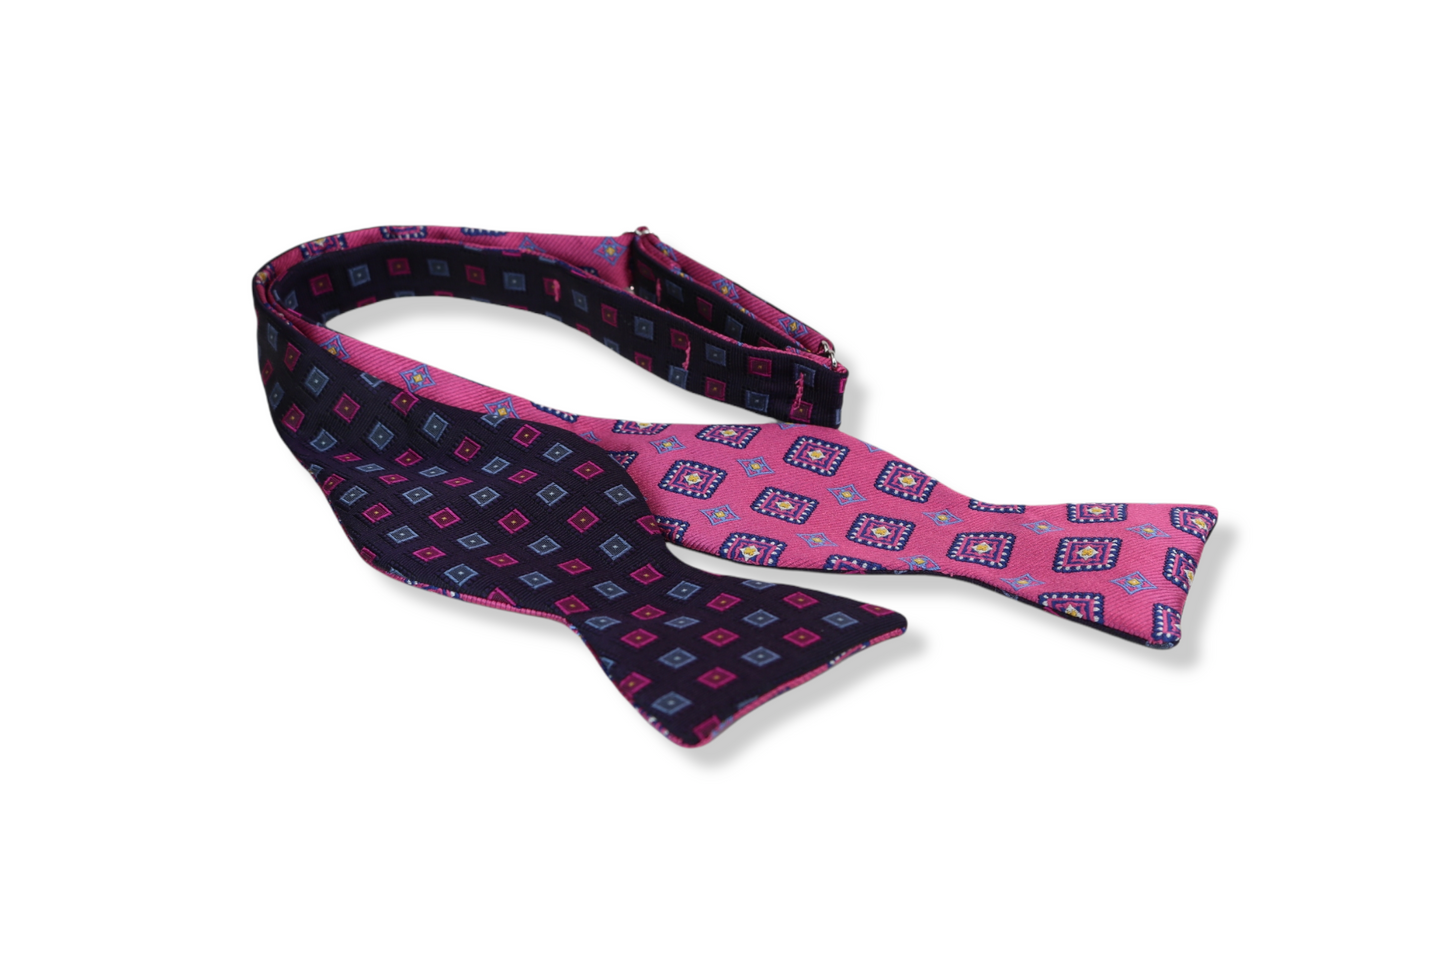 The Florian Reversible Butterfly Bow Tie